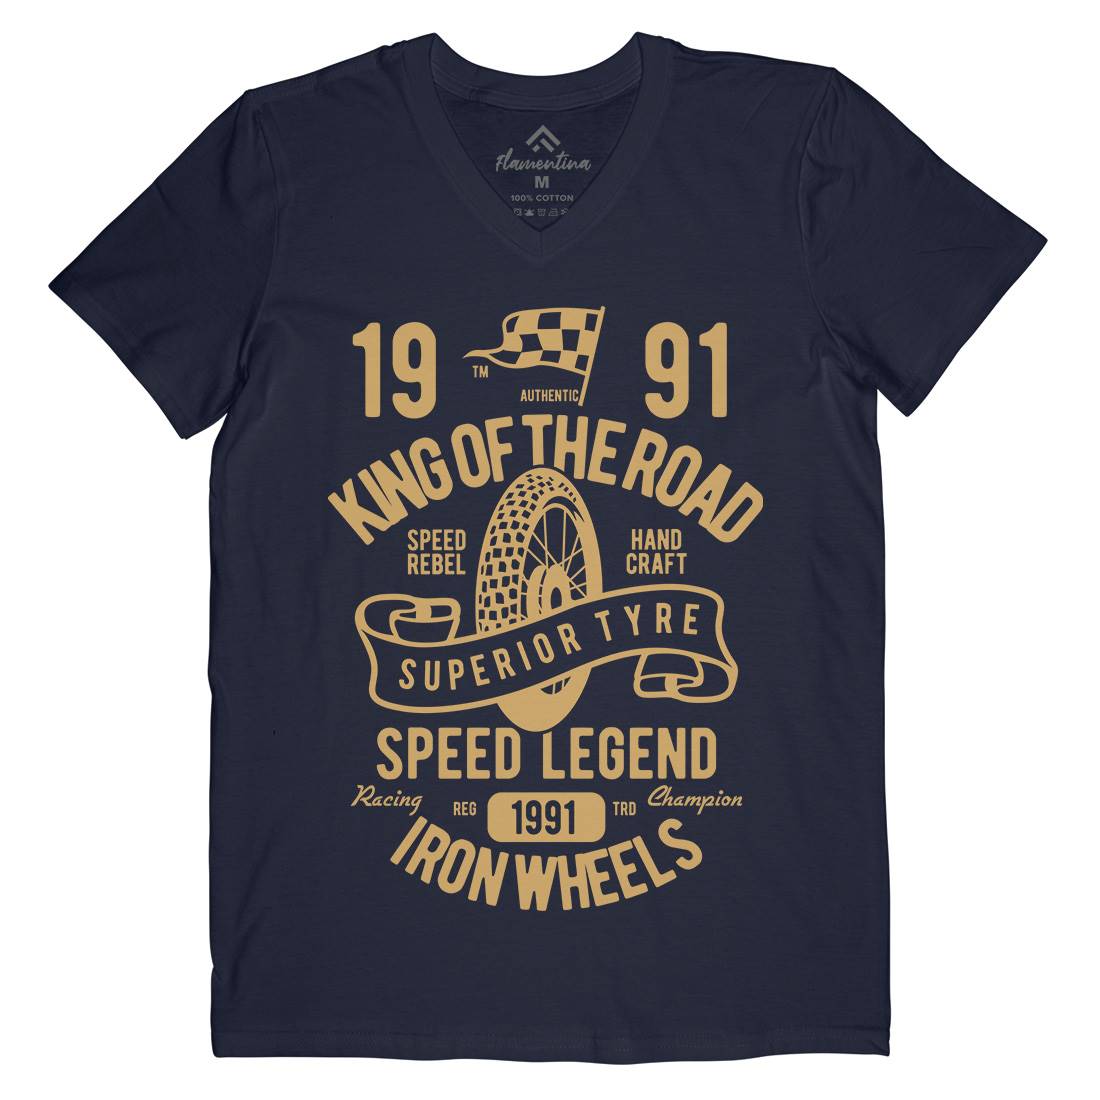 Superior Tyre King Of The Road Mens Organic V-Neck T-Shirt Motorcycles B458